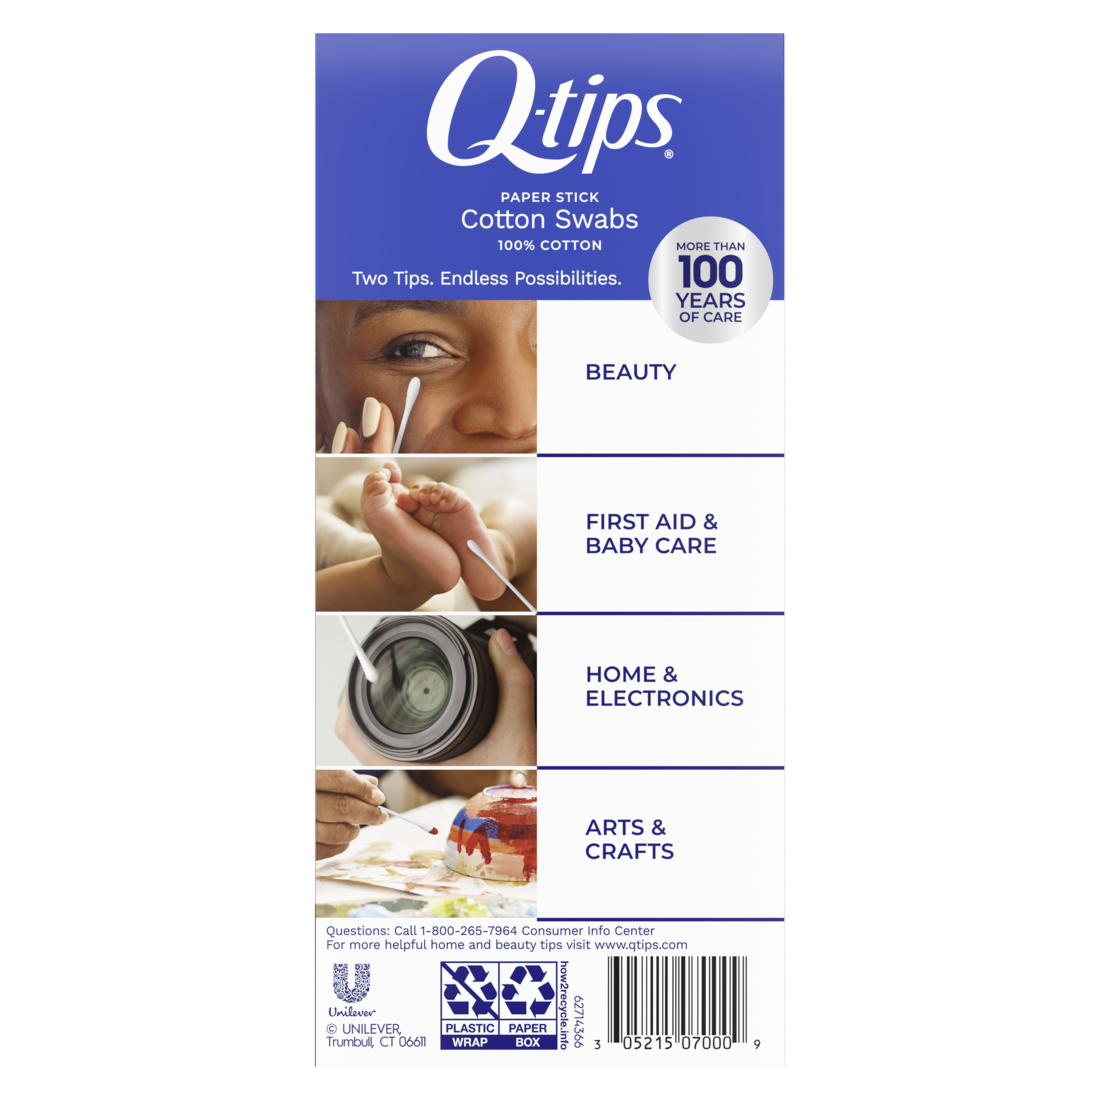 Q-tips Cotton Swabs, Original, For Home, First Aid and Beauty, 100% Cotton, 170 Count - image 2 of 6